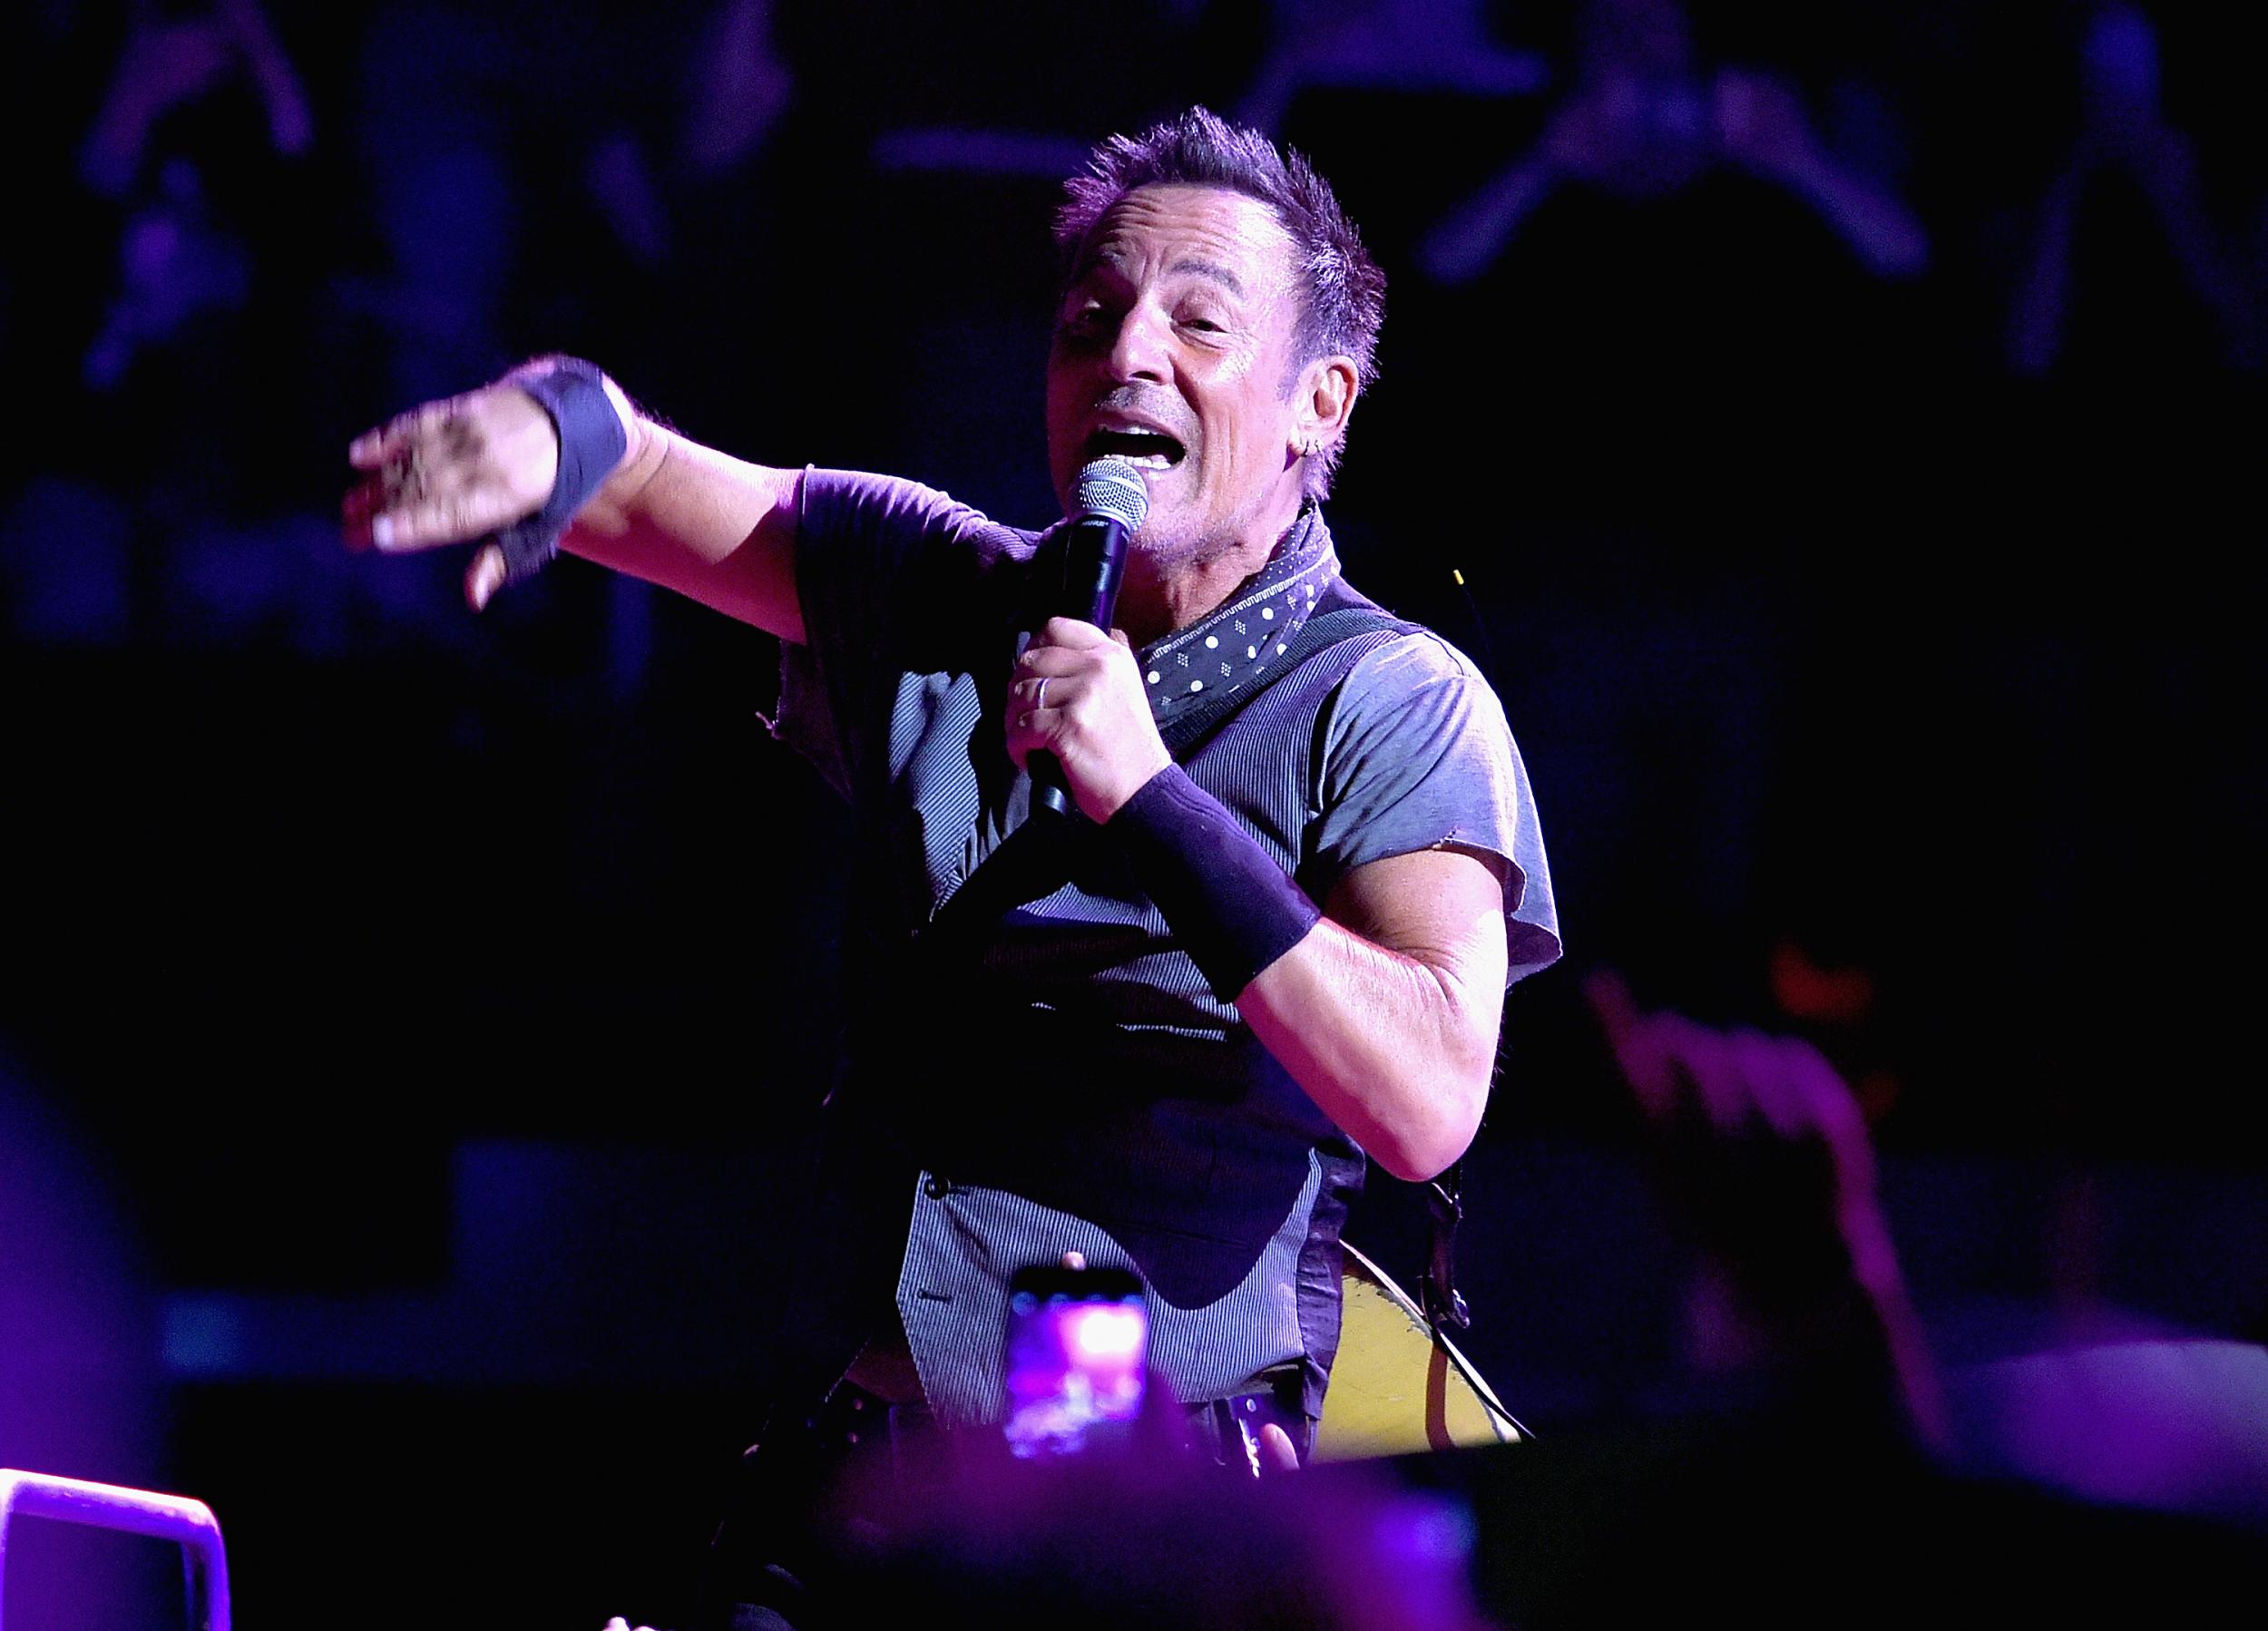 Bruce Springsteen cancelled a concert in North Carolina